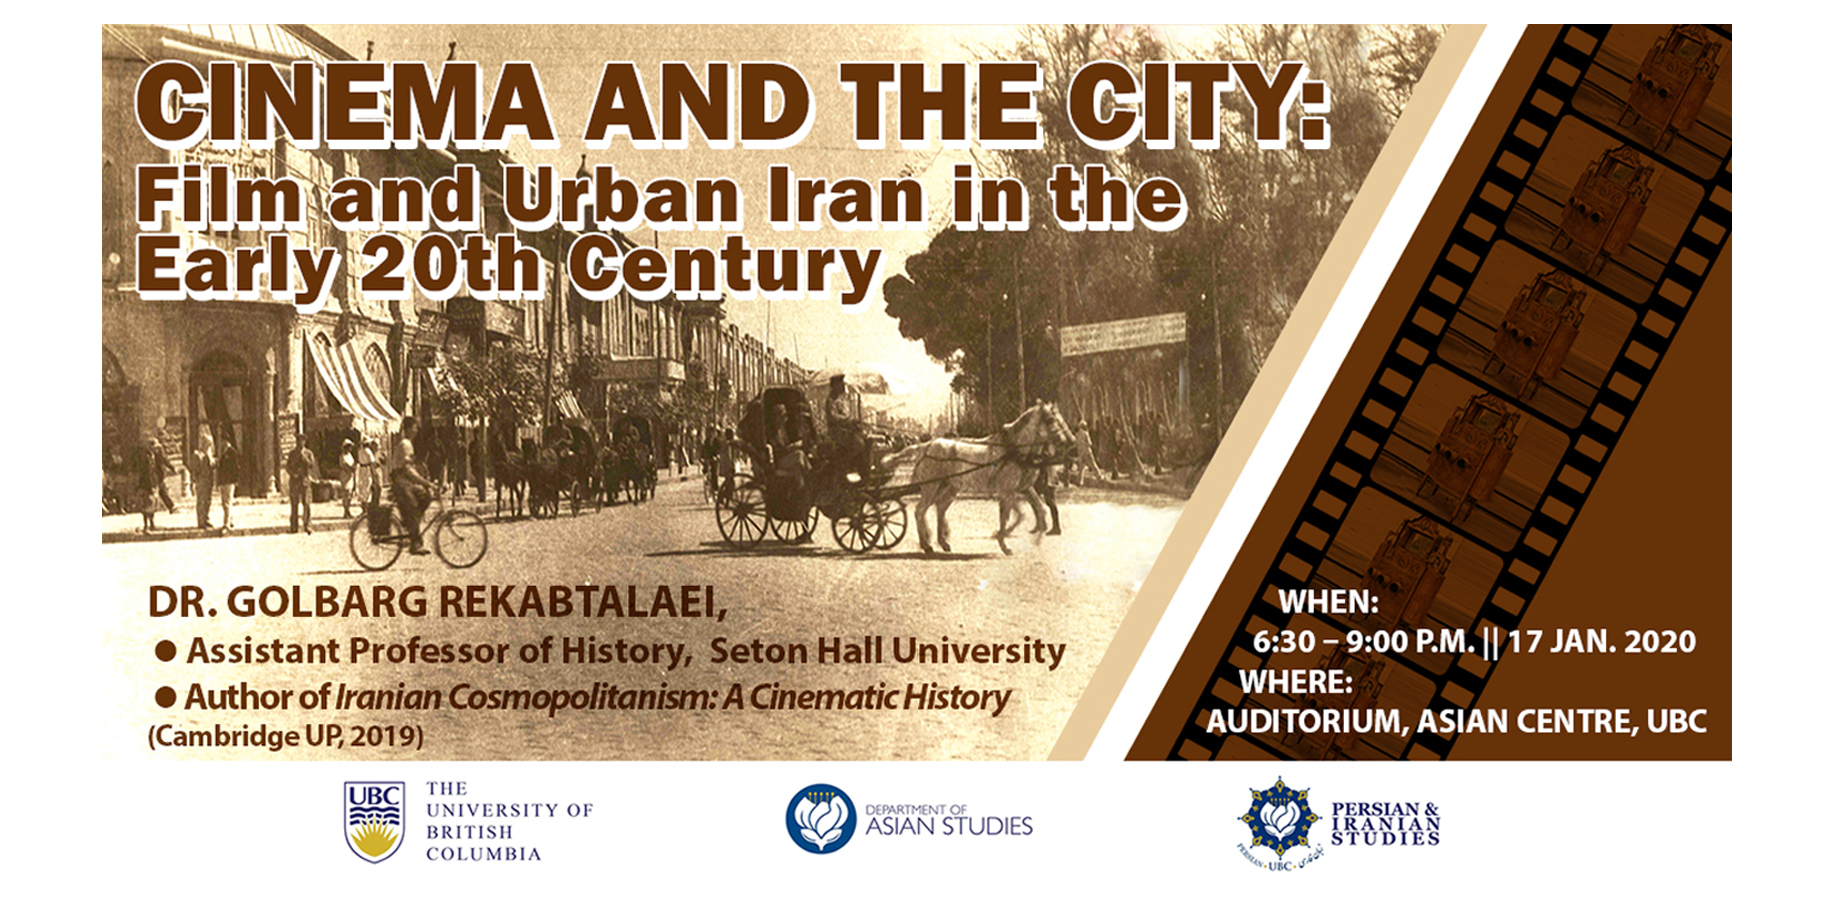 Cinema And The City Film And Urban Iran In The Early 20th Century In